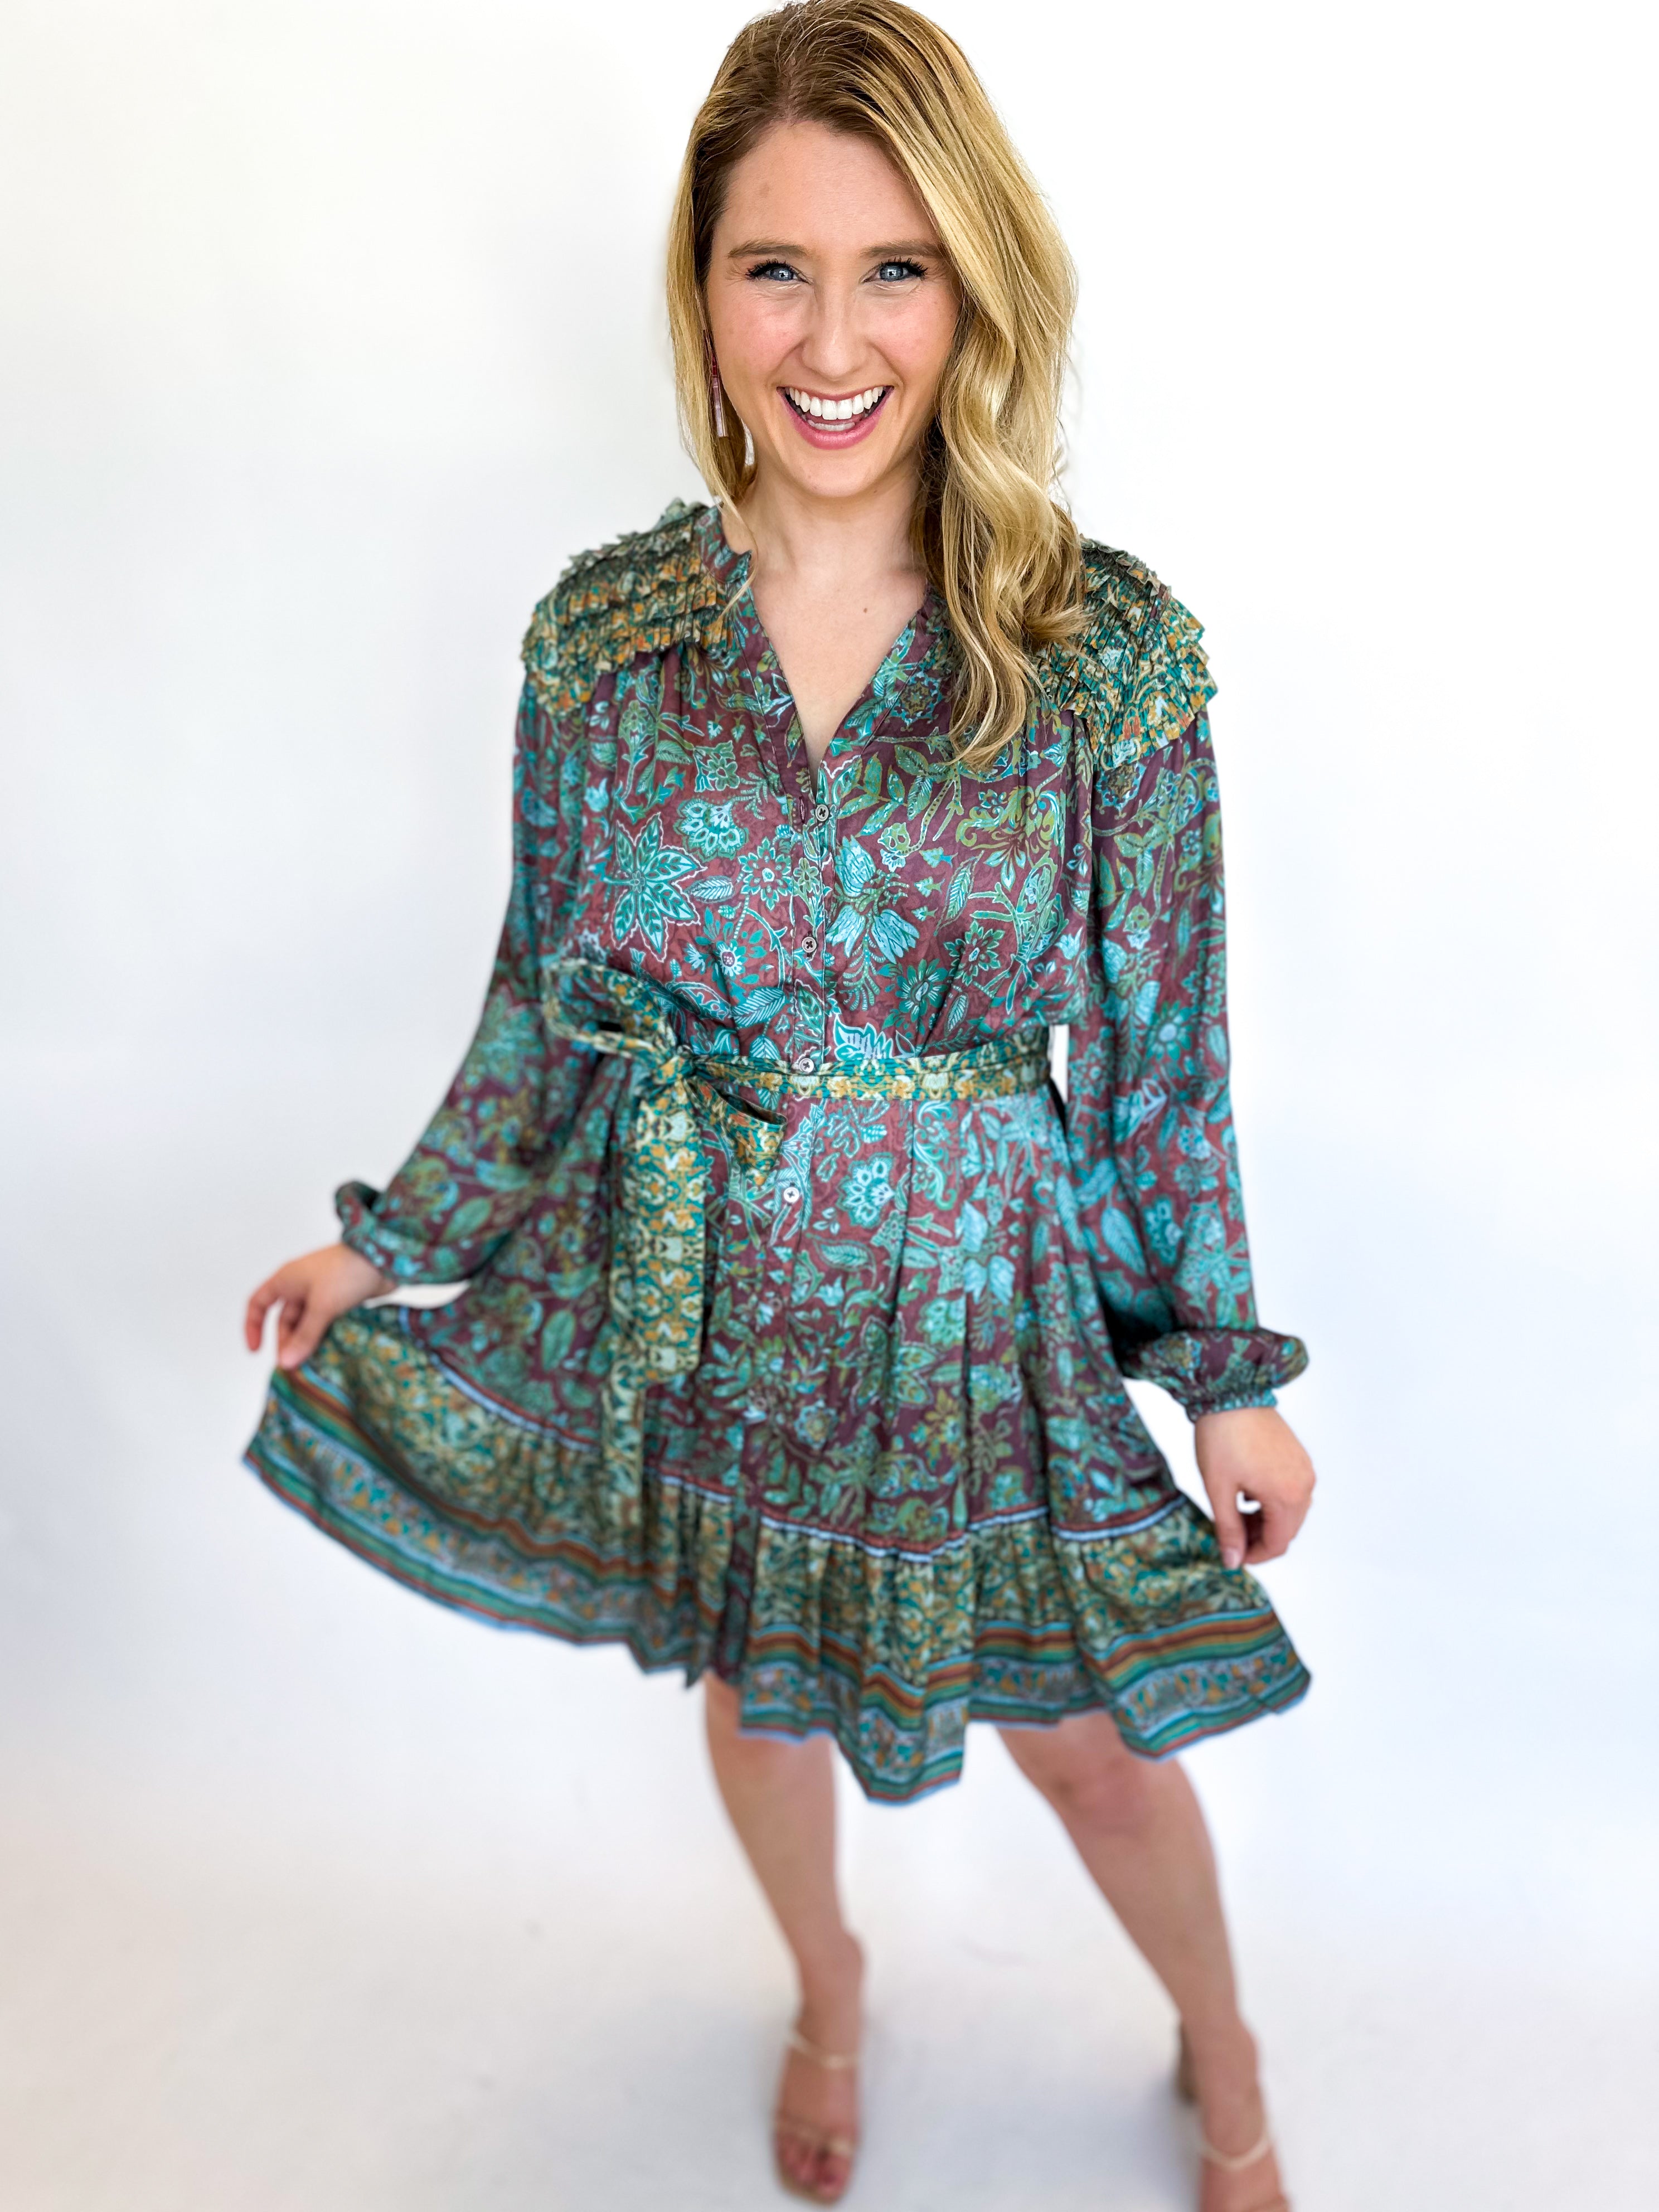 Teal & Mocha Floral Mini Dress-510 Mini-CURRENT AIR CLOTHING-July & June Women's Fashion Boutique Located in San Antonio, Texas